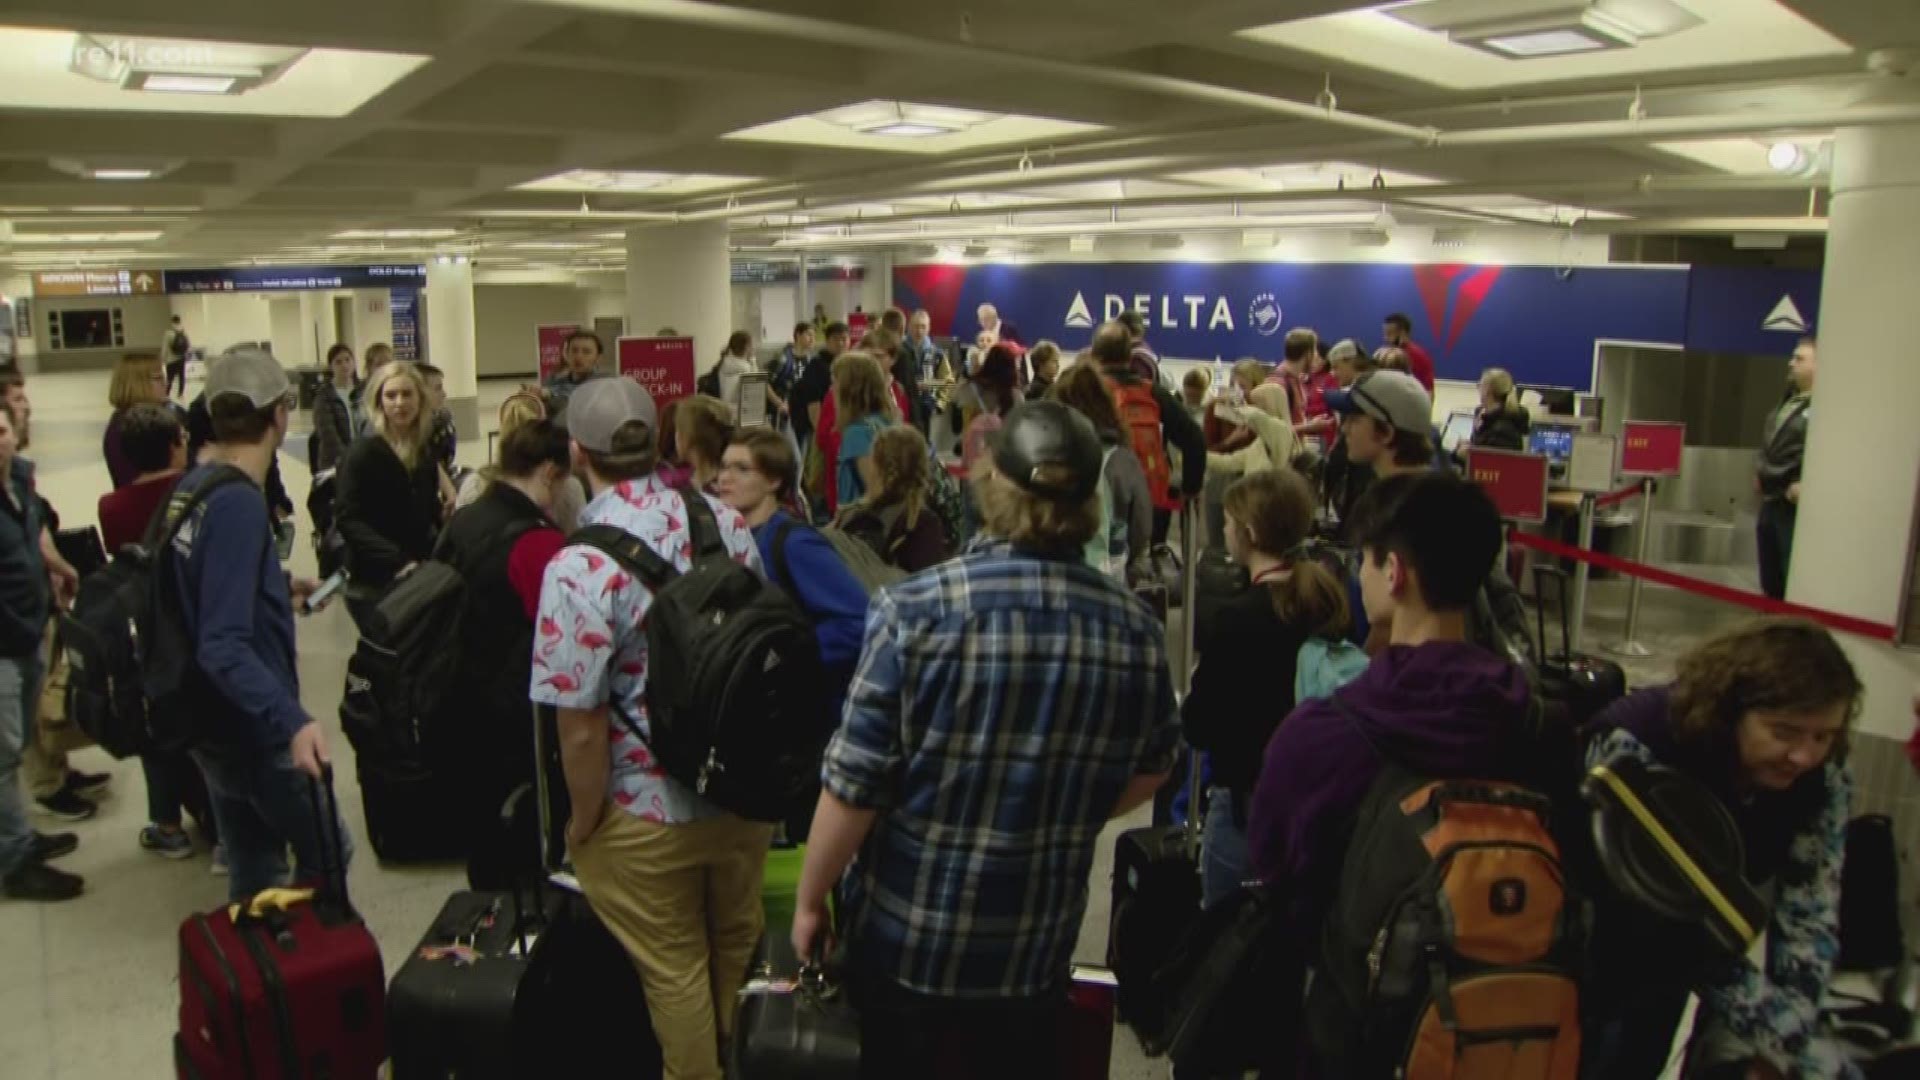 Over 100 band students from Minnesota got stuck in a travel nightmare because of the April snowstorm.